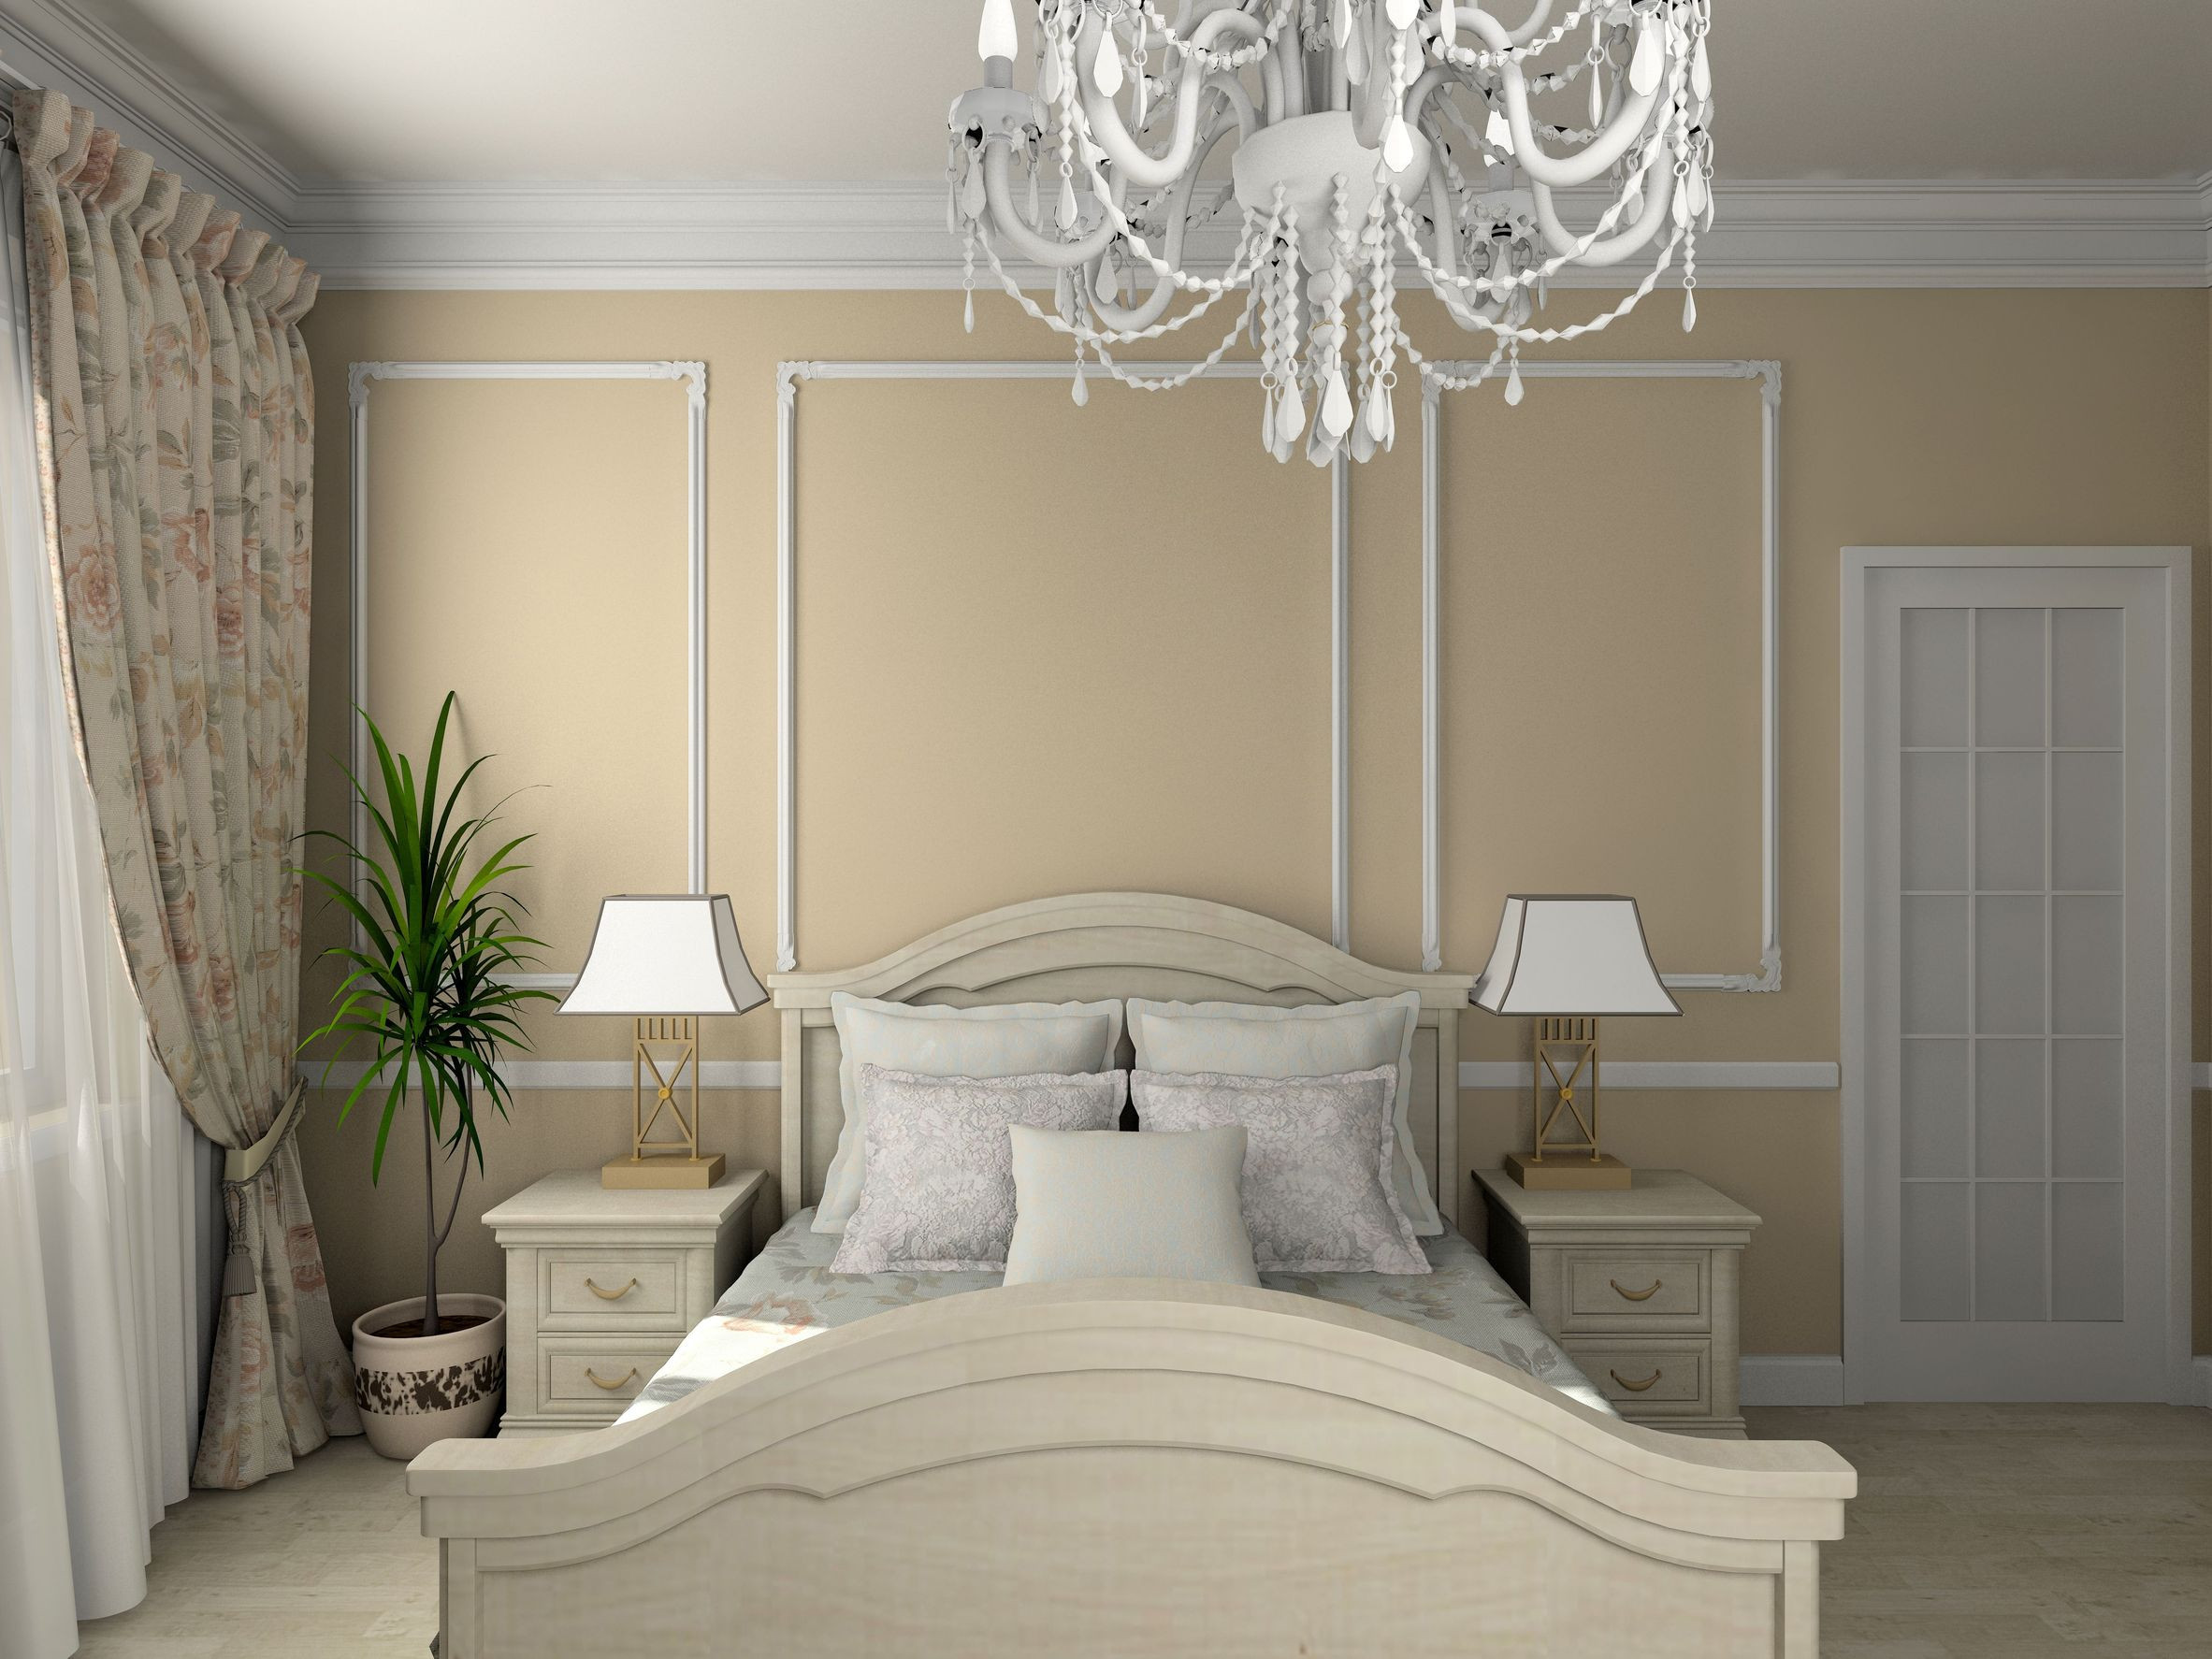 Soothing Paint Colors For Bedrooms
 Calming Paint Colors for Bedroom Amaza Design